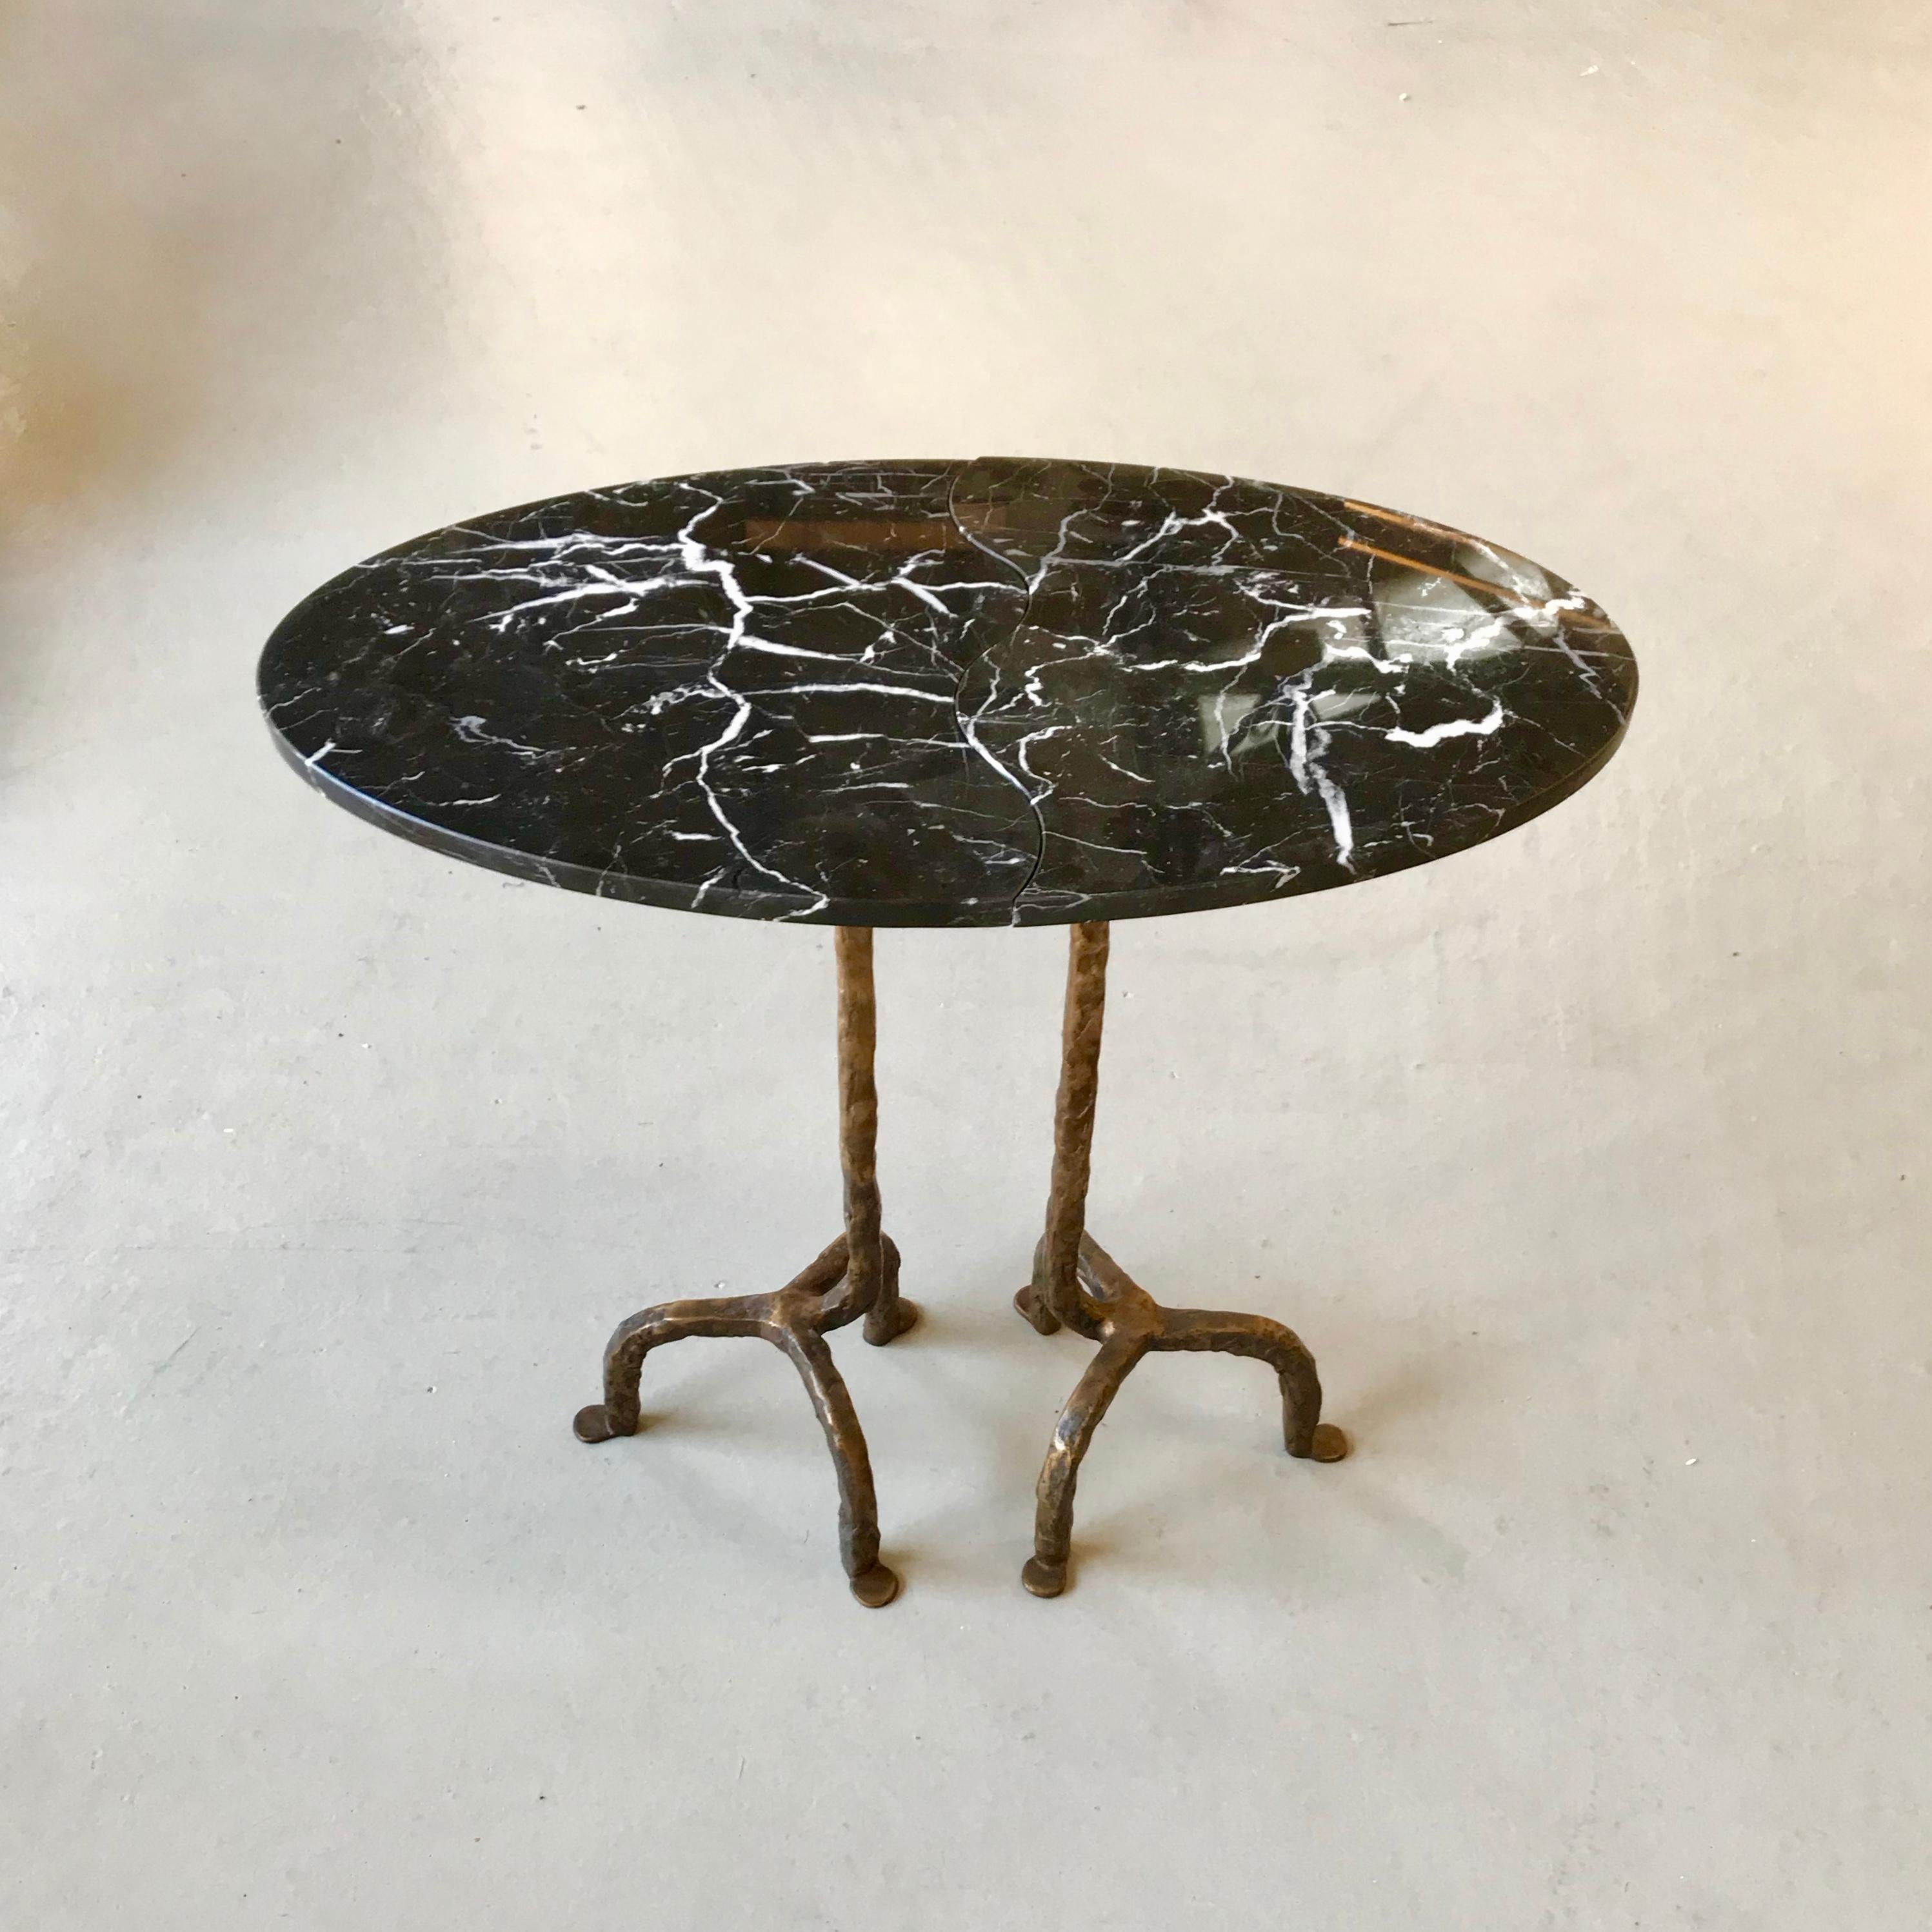 Set of 2 coffee tables SWAN with bases in hand-molded bronze cast and tops in polished black Marquinha marble.
